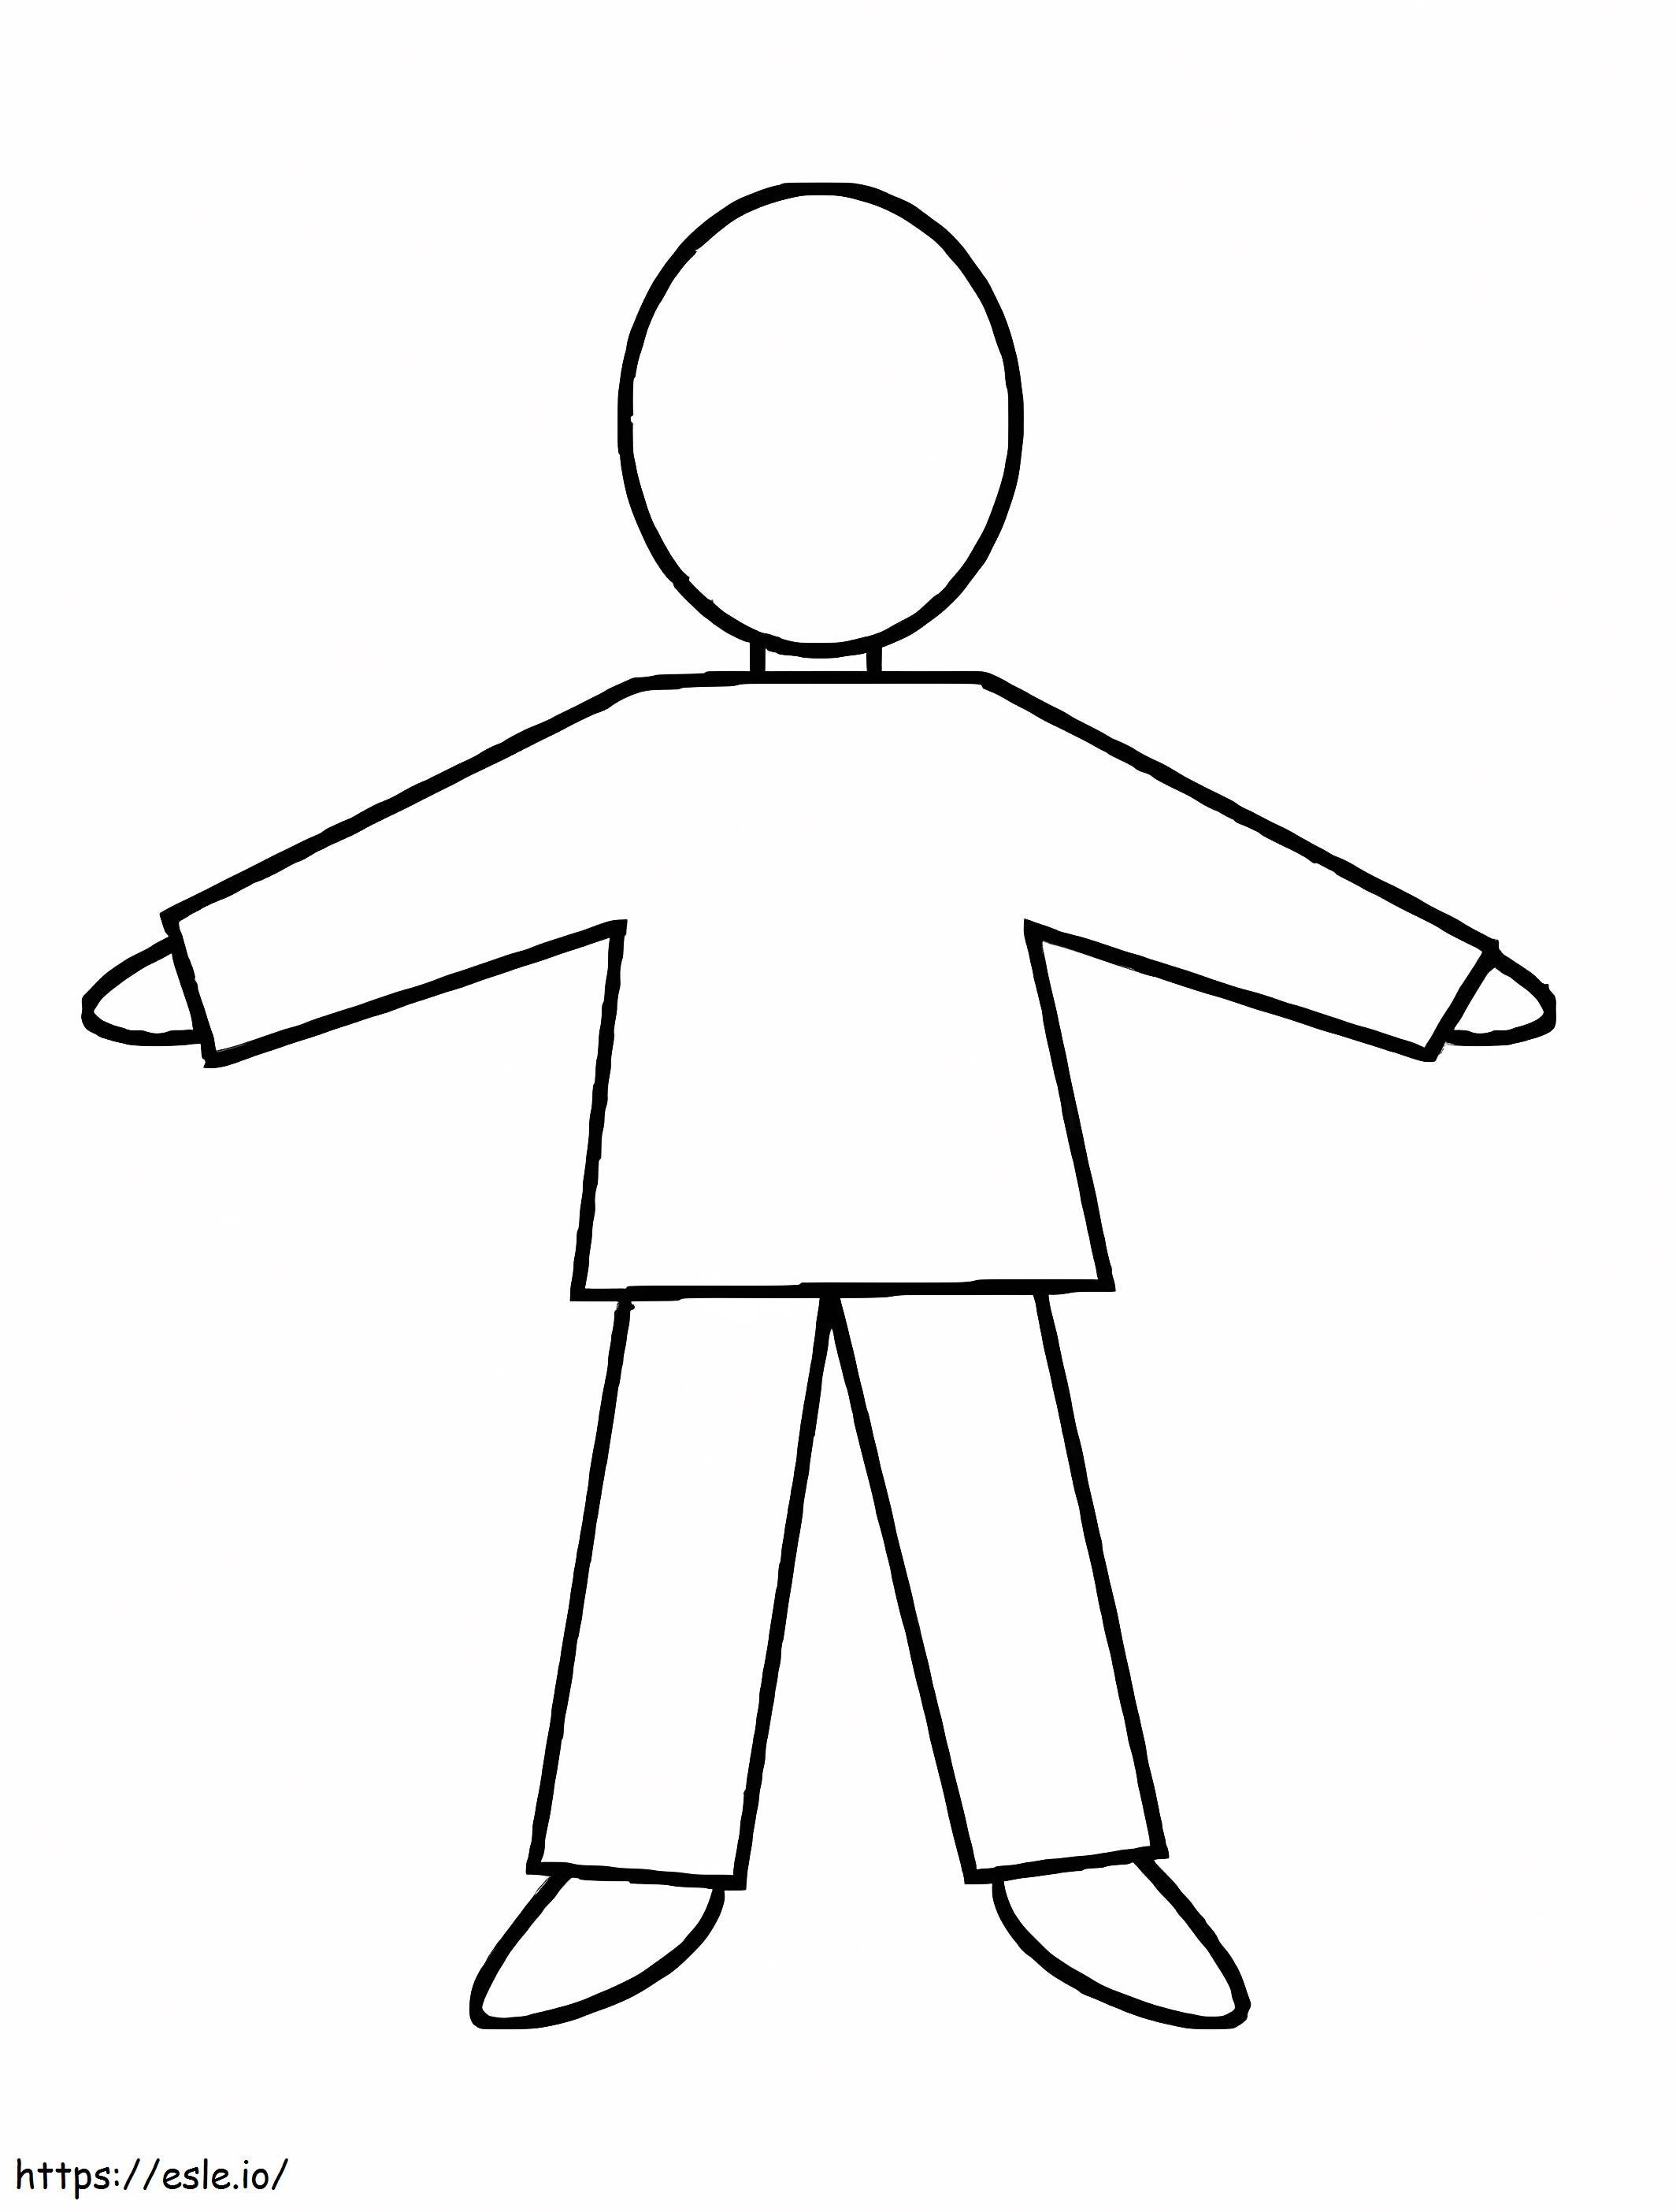 Normal Person Scheme coloring page